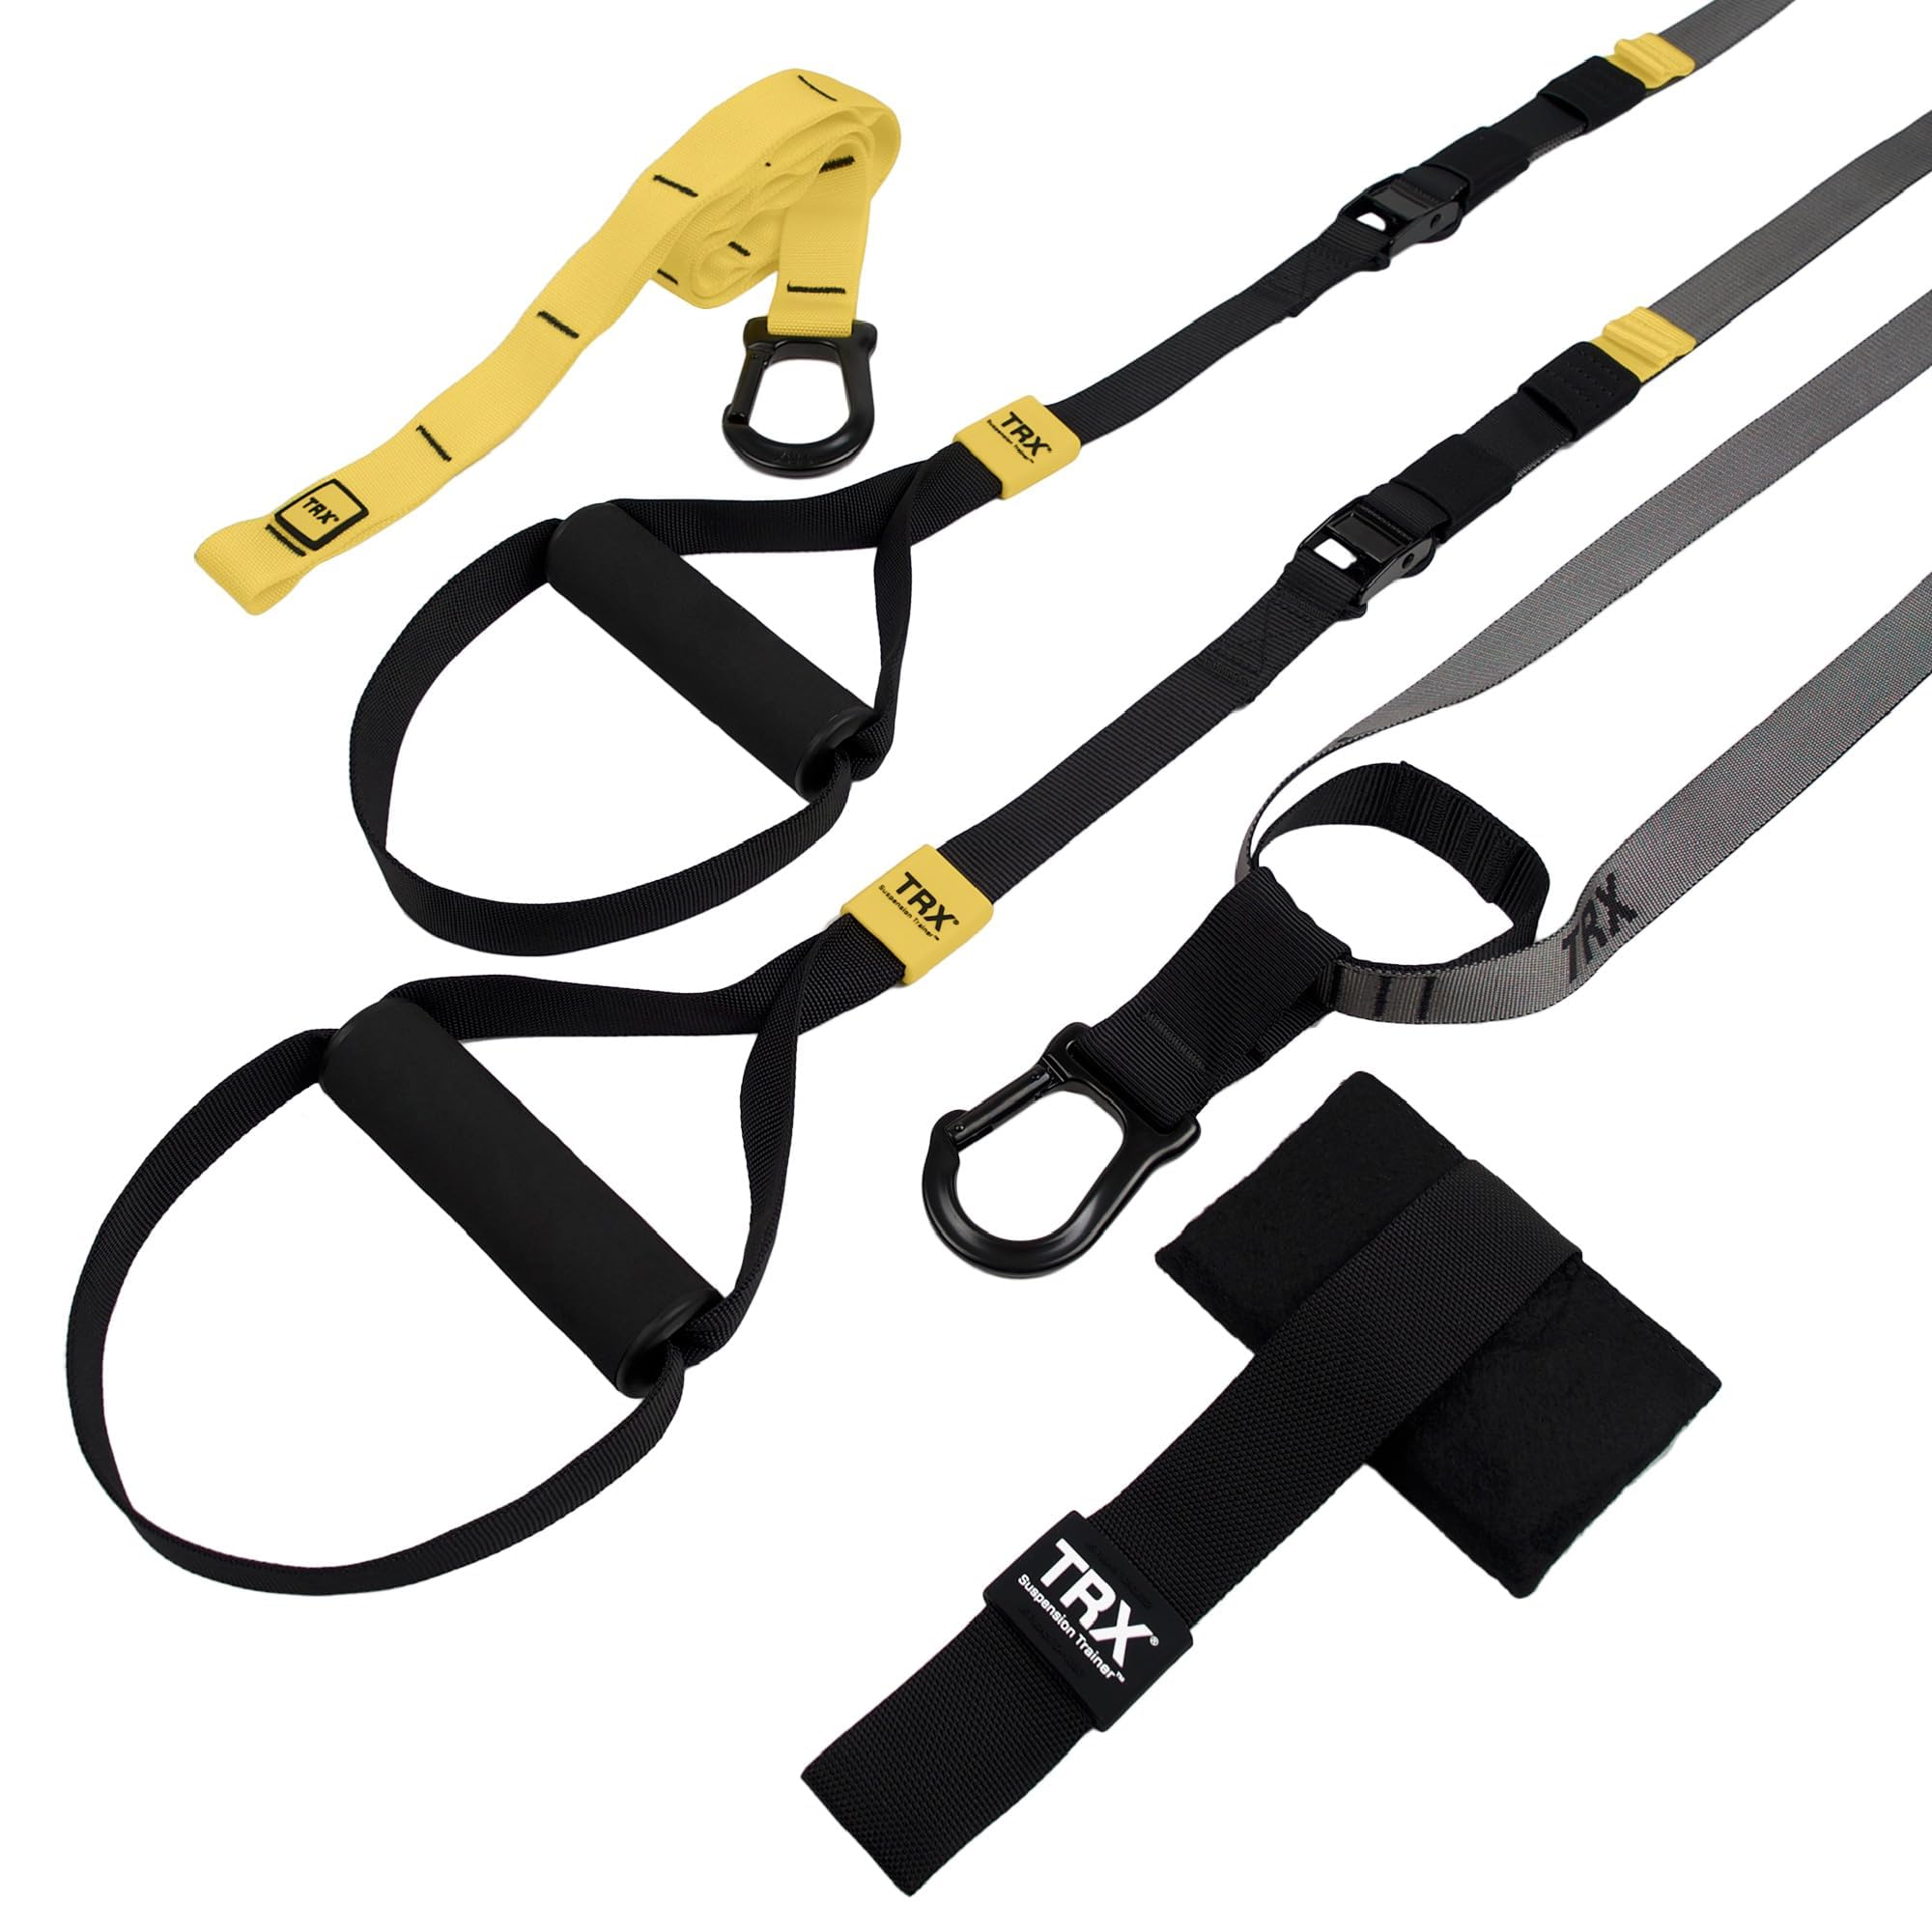 TRX GO Suspension Trainer System, Full Body Workout for All Levels Goals, Lightweight Portable, Fast, Fun Effective Workouts, Home Gym Equipment or for Outdoor Workouts, Grey>